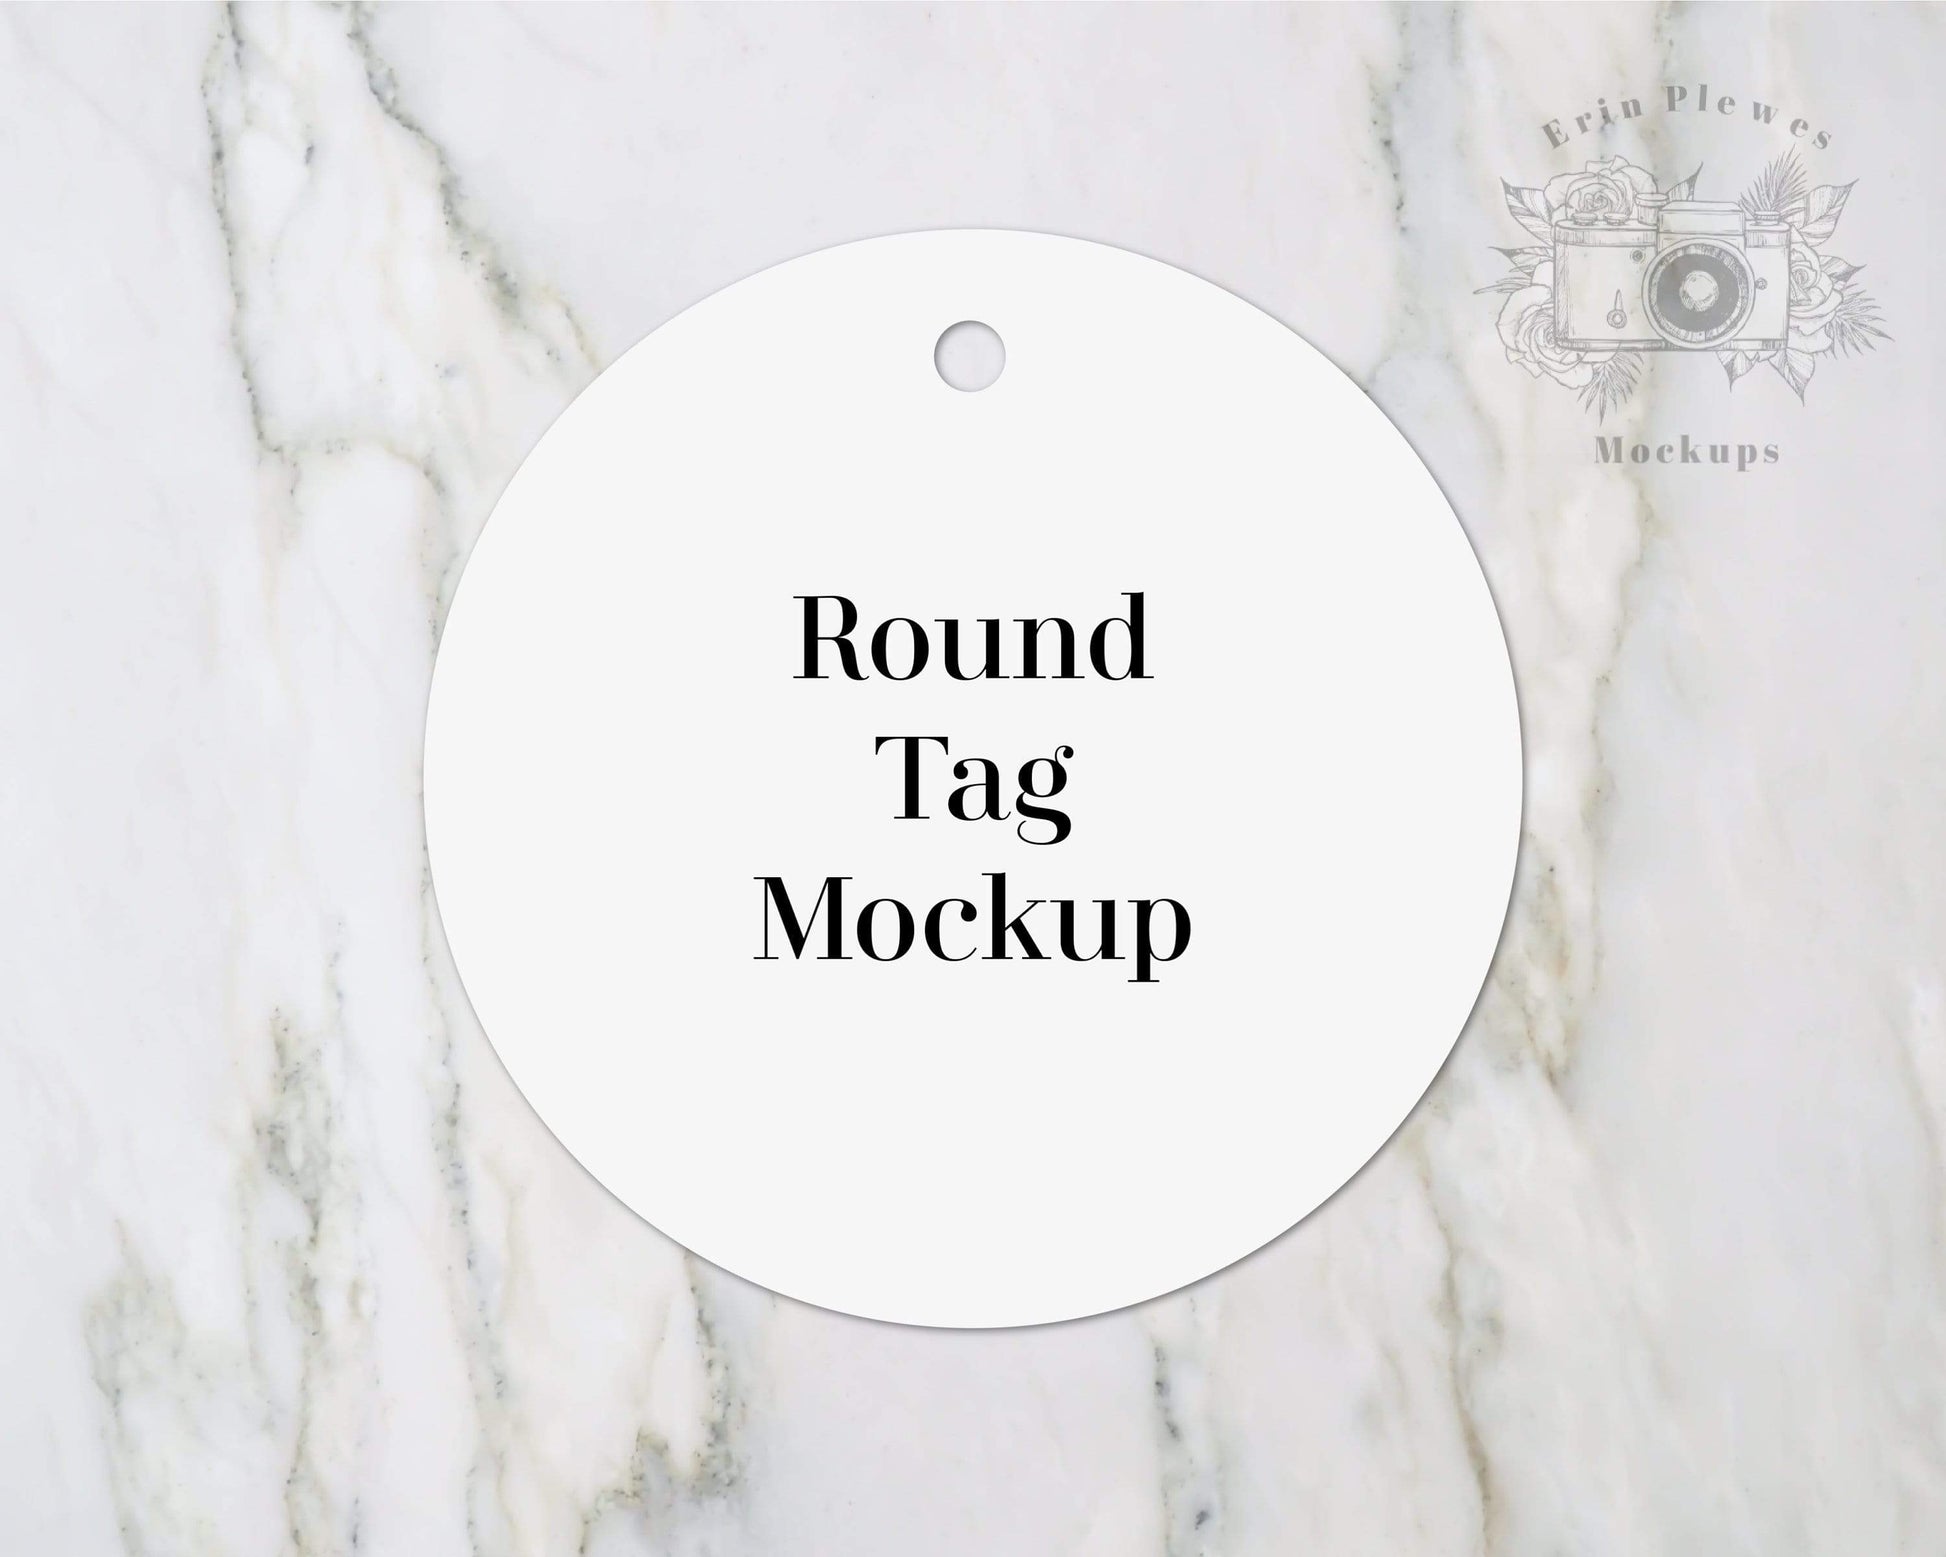 Erin Plewes Mockups Round tag mockup, Wedding gift tag mock up flat lay for present labels and lifestyle stock photography, Jpeg instant Digital Download